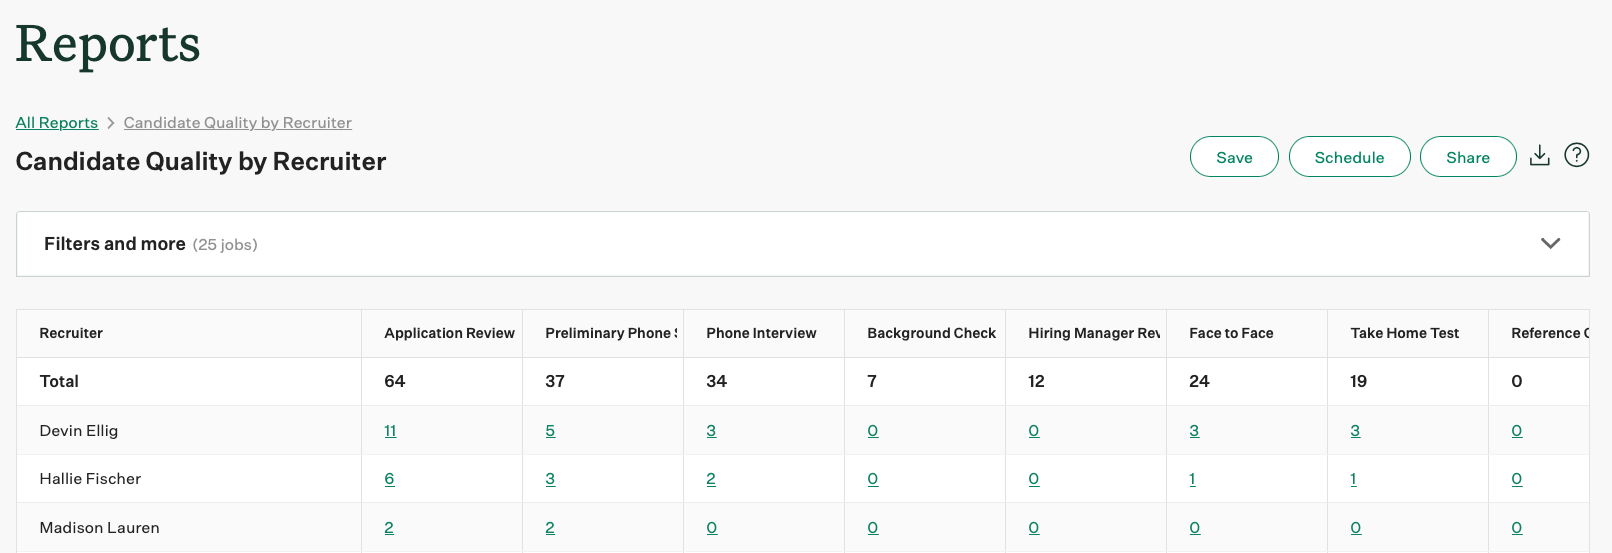 Screenshot of an example candidate quality by recruiter report